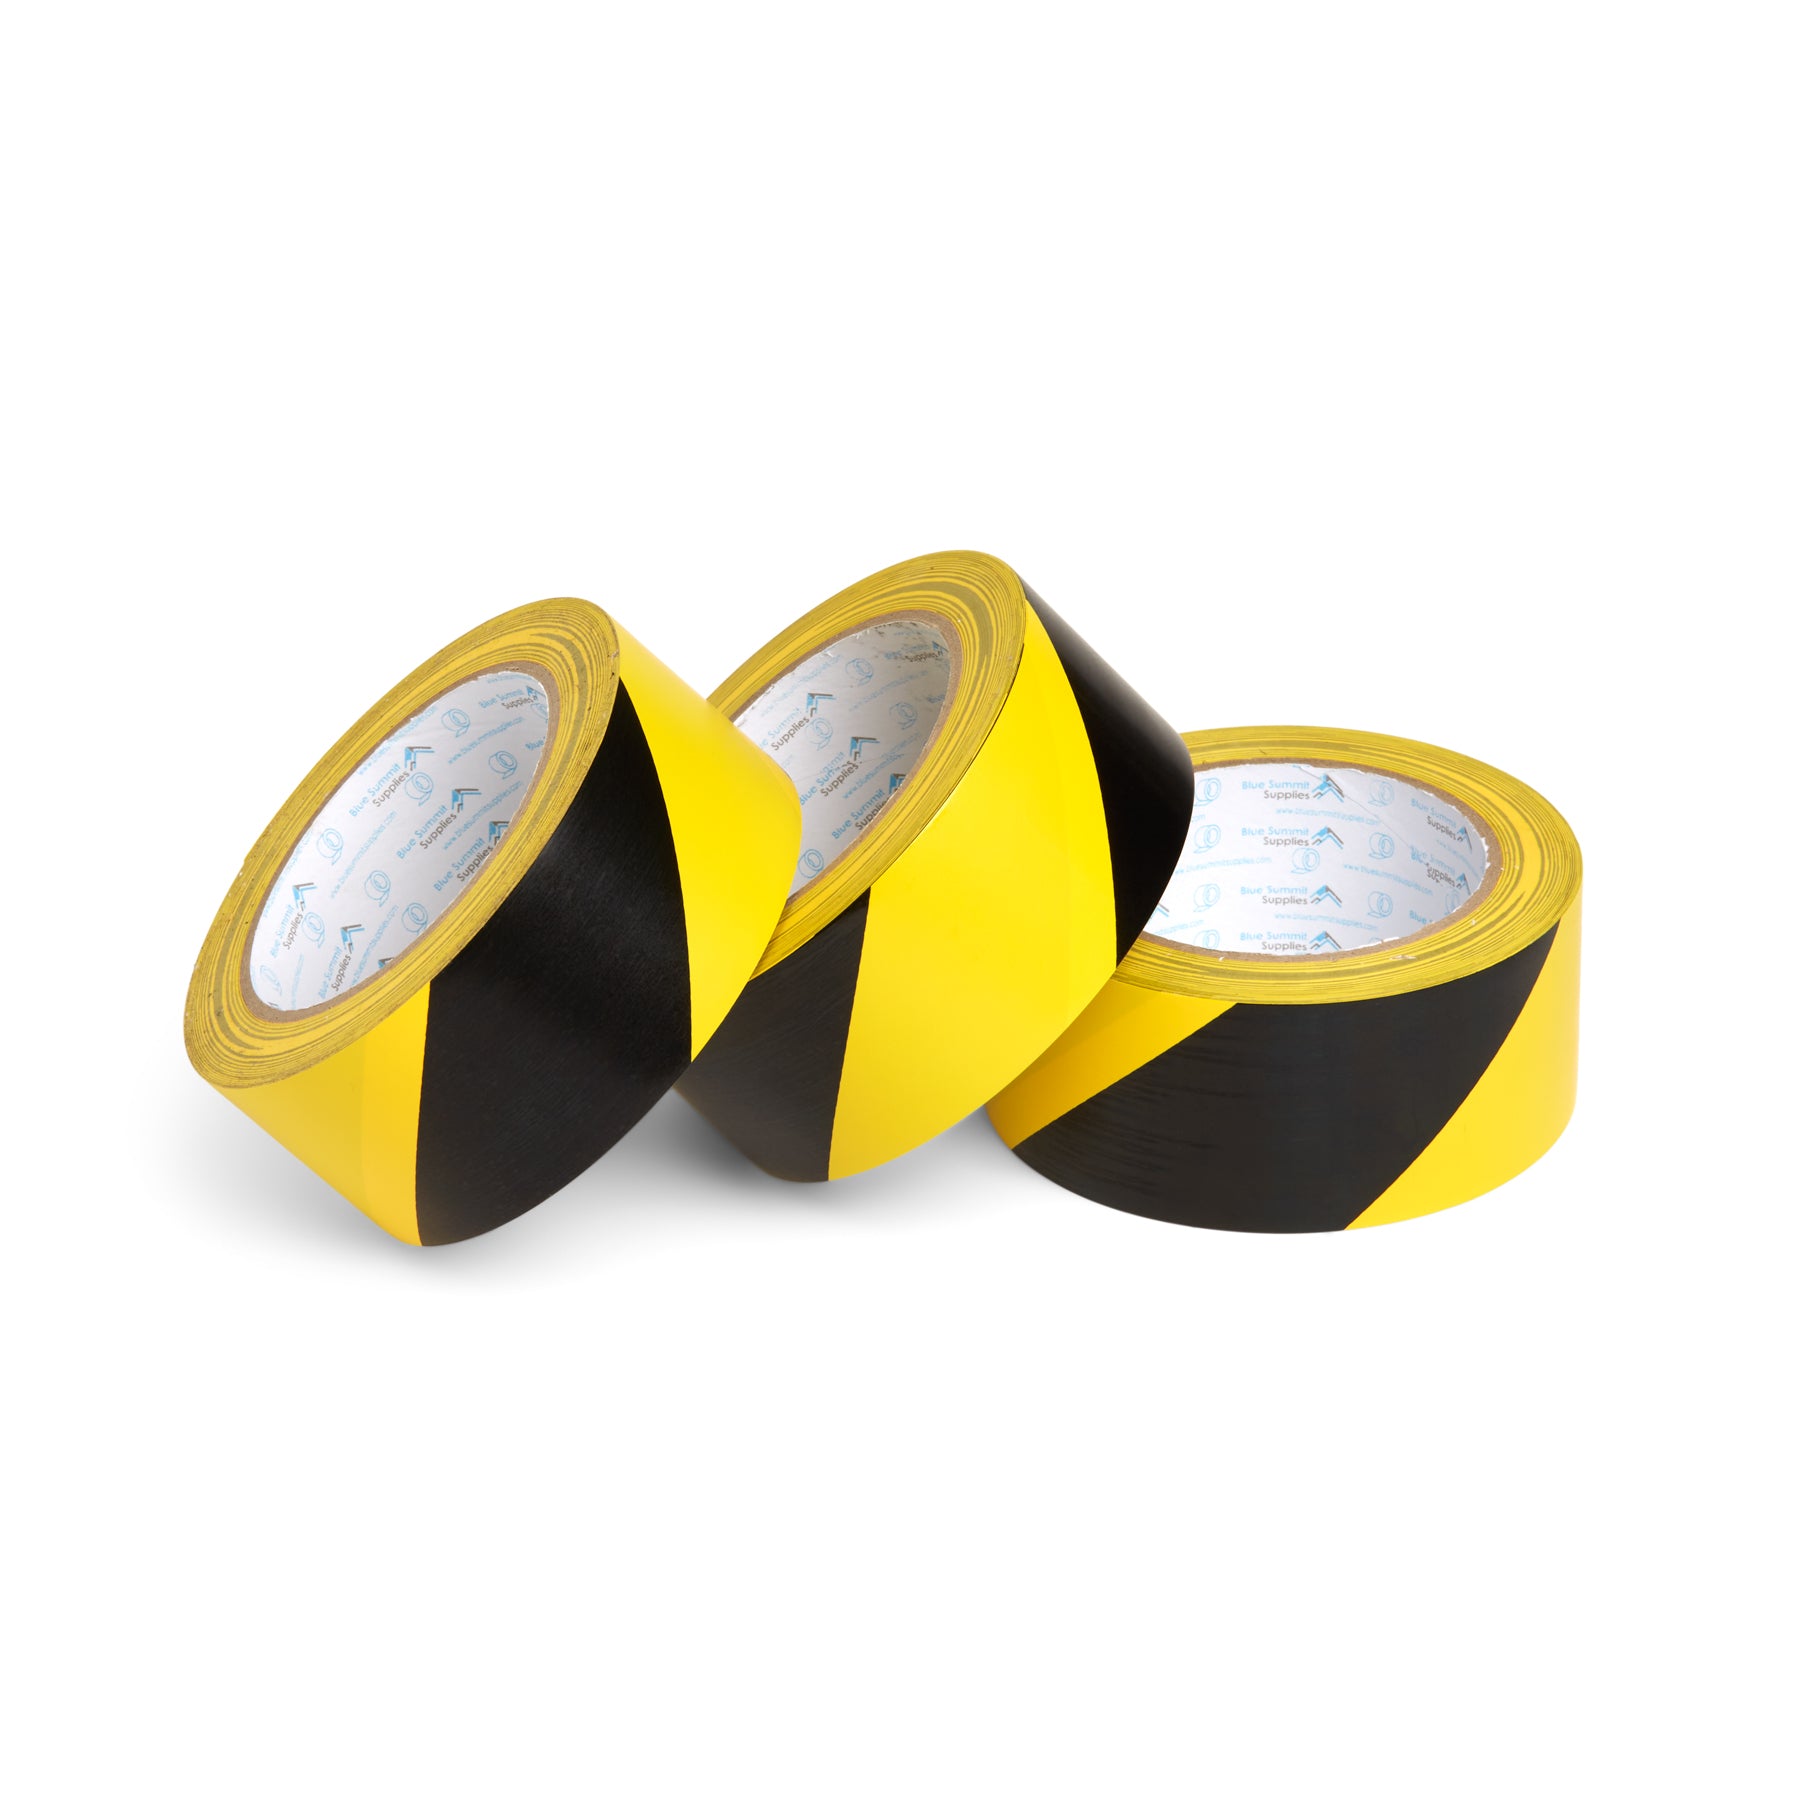 Summit Safety Reflective Tape 1530mm x 19mm - Yellow